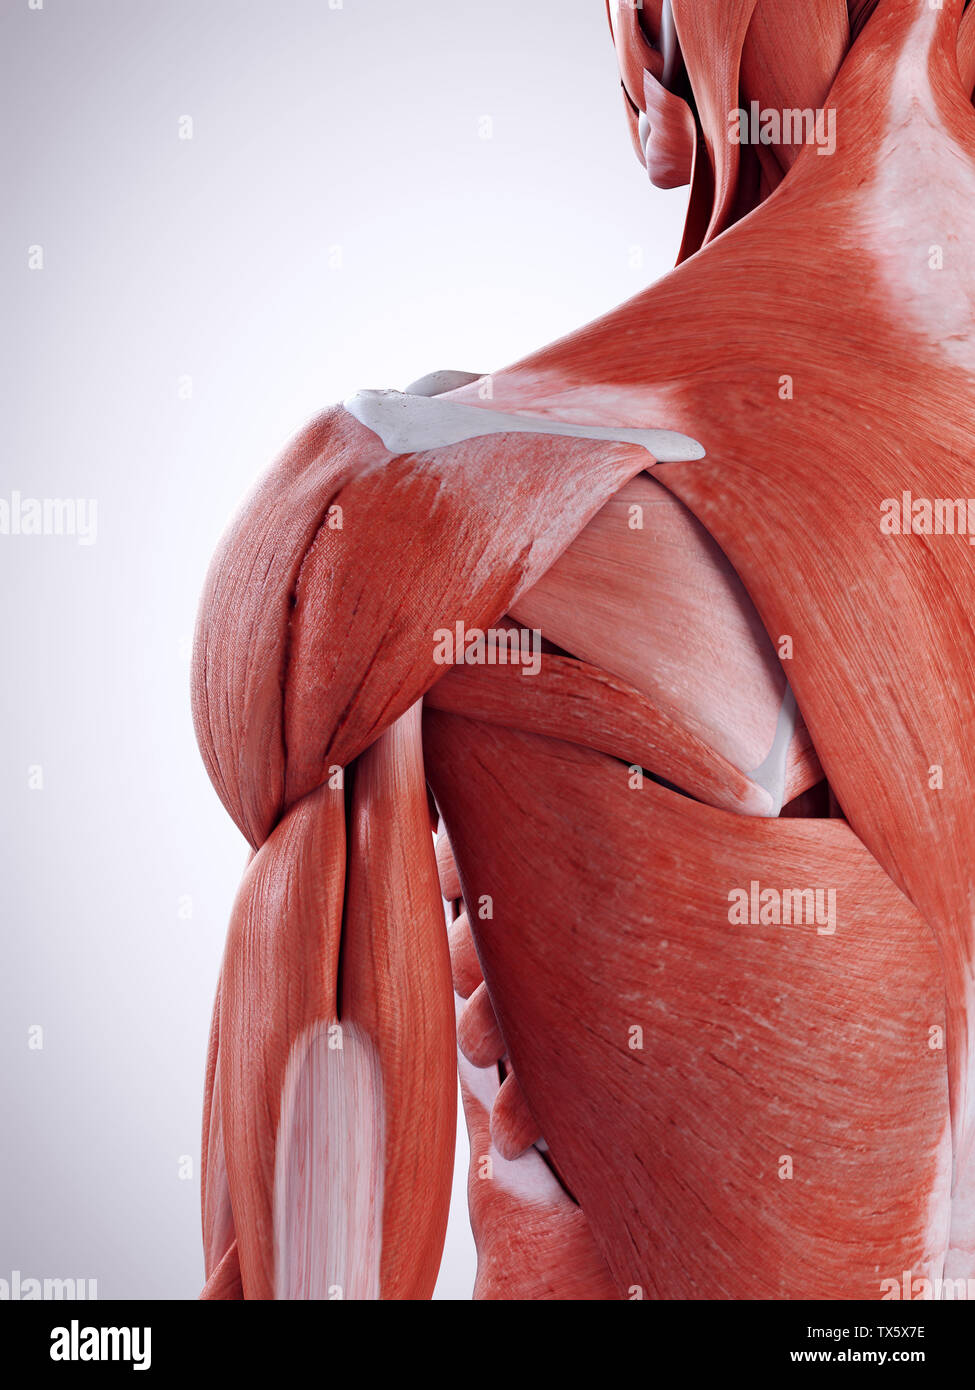 3d rendered medically accurate illustration of the shoulder muscles Stock Photo